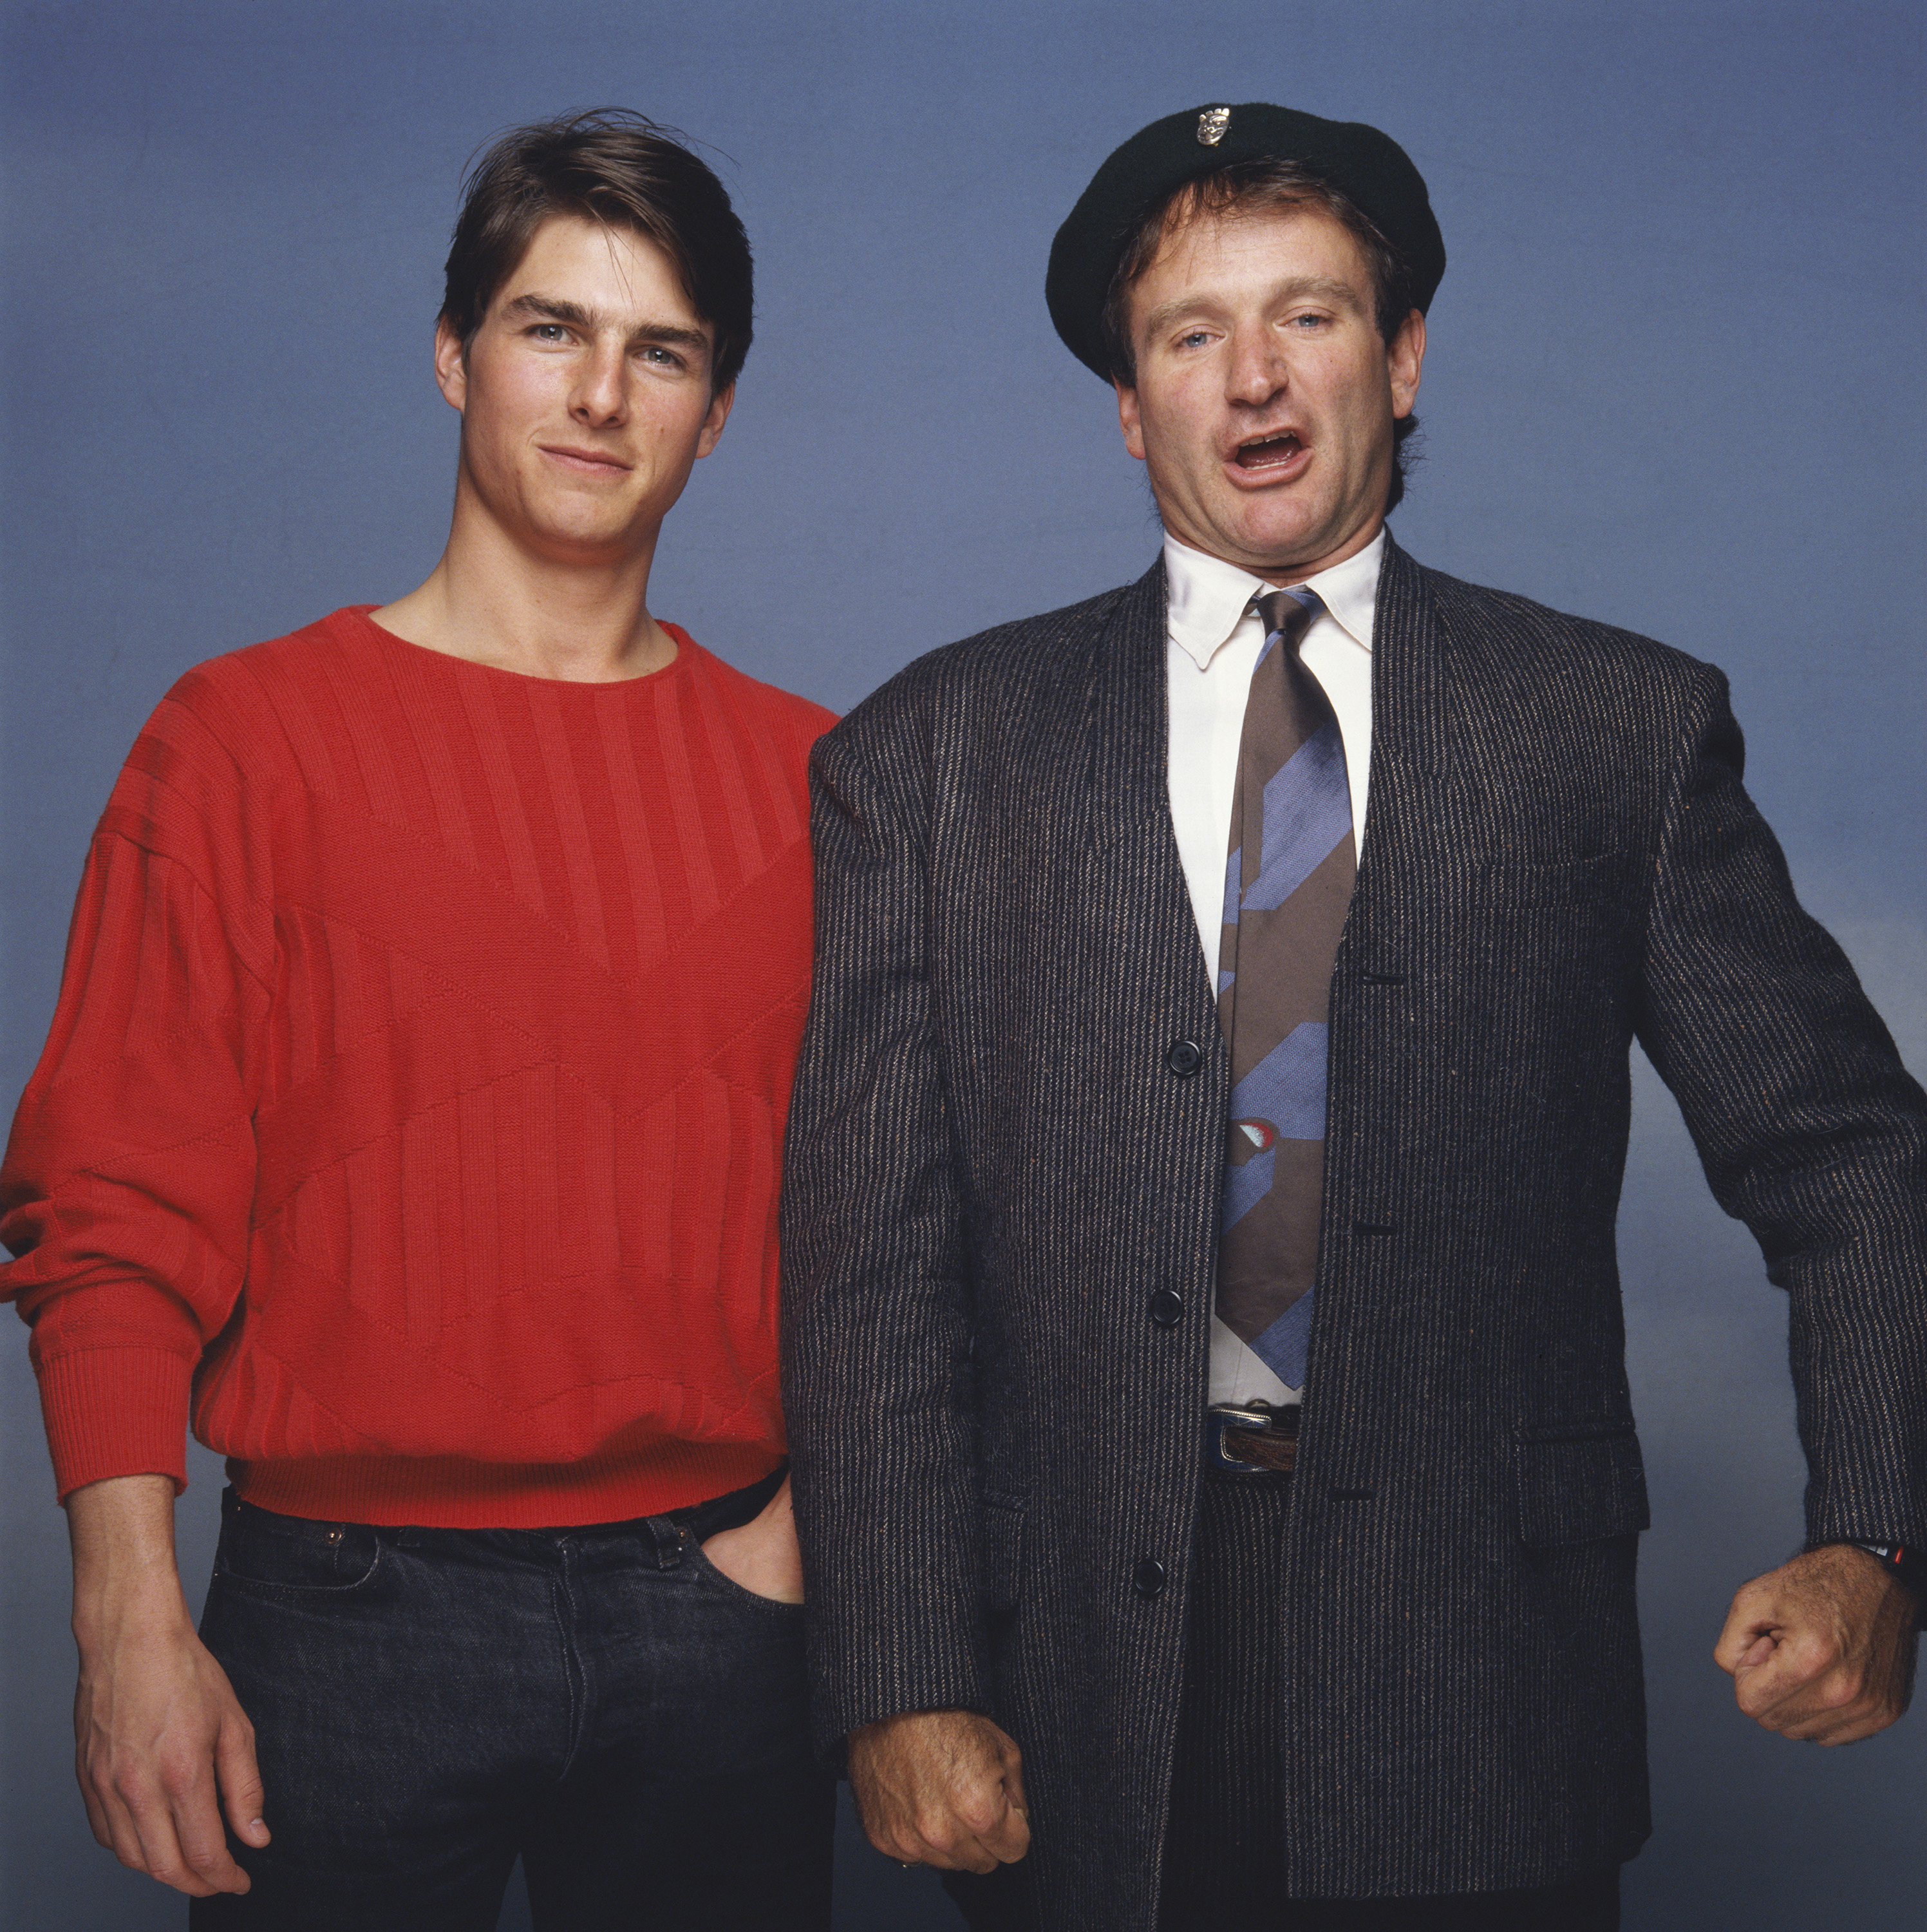 1987_terry_o_neill_tom_cruise_and_robin_williams_photoshoot_for_paramount_studios_75th_anniversary_1987.jpg